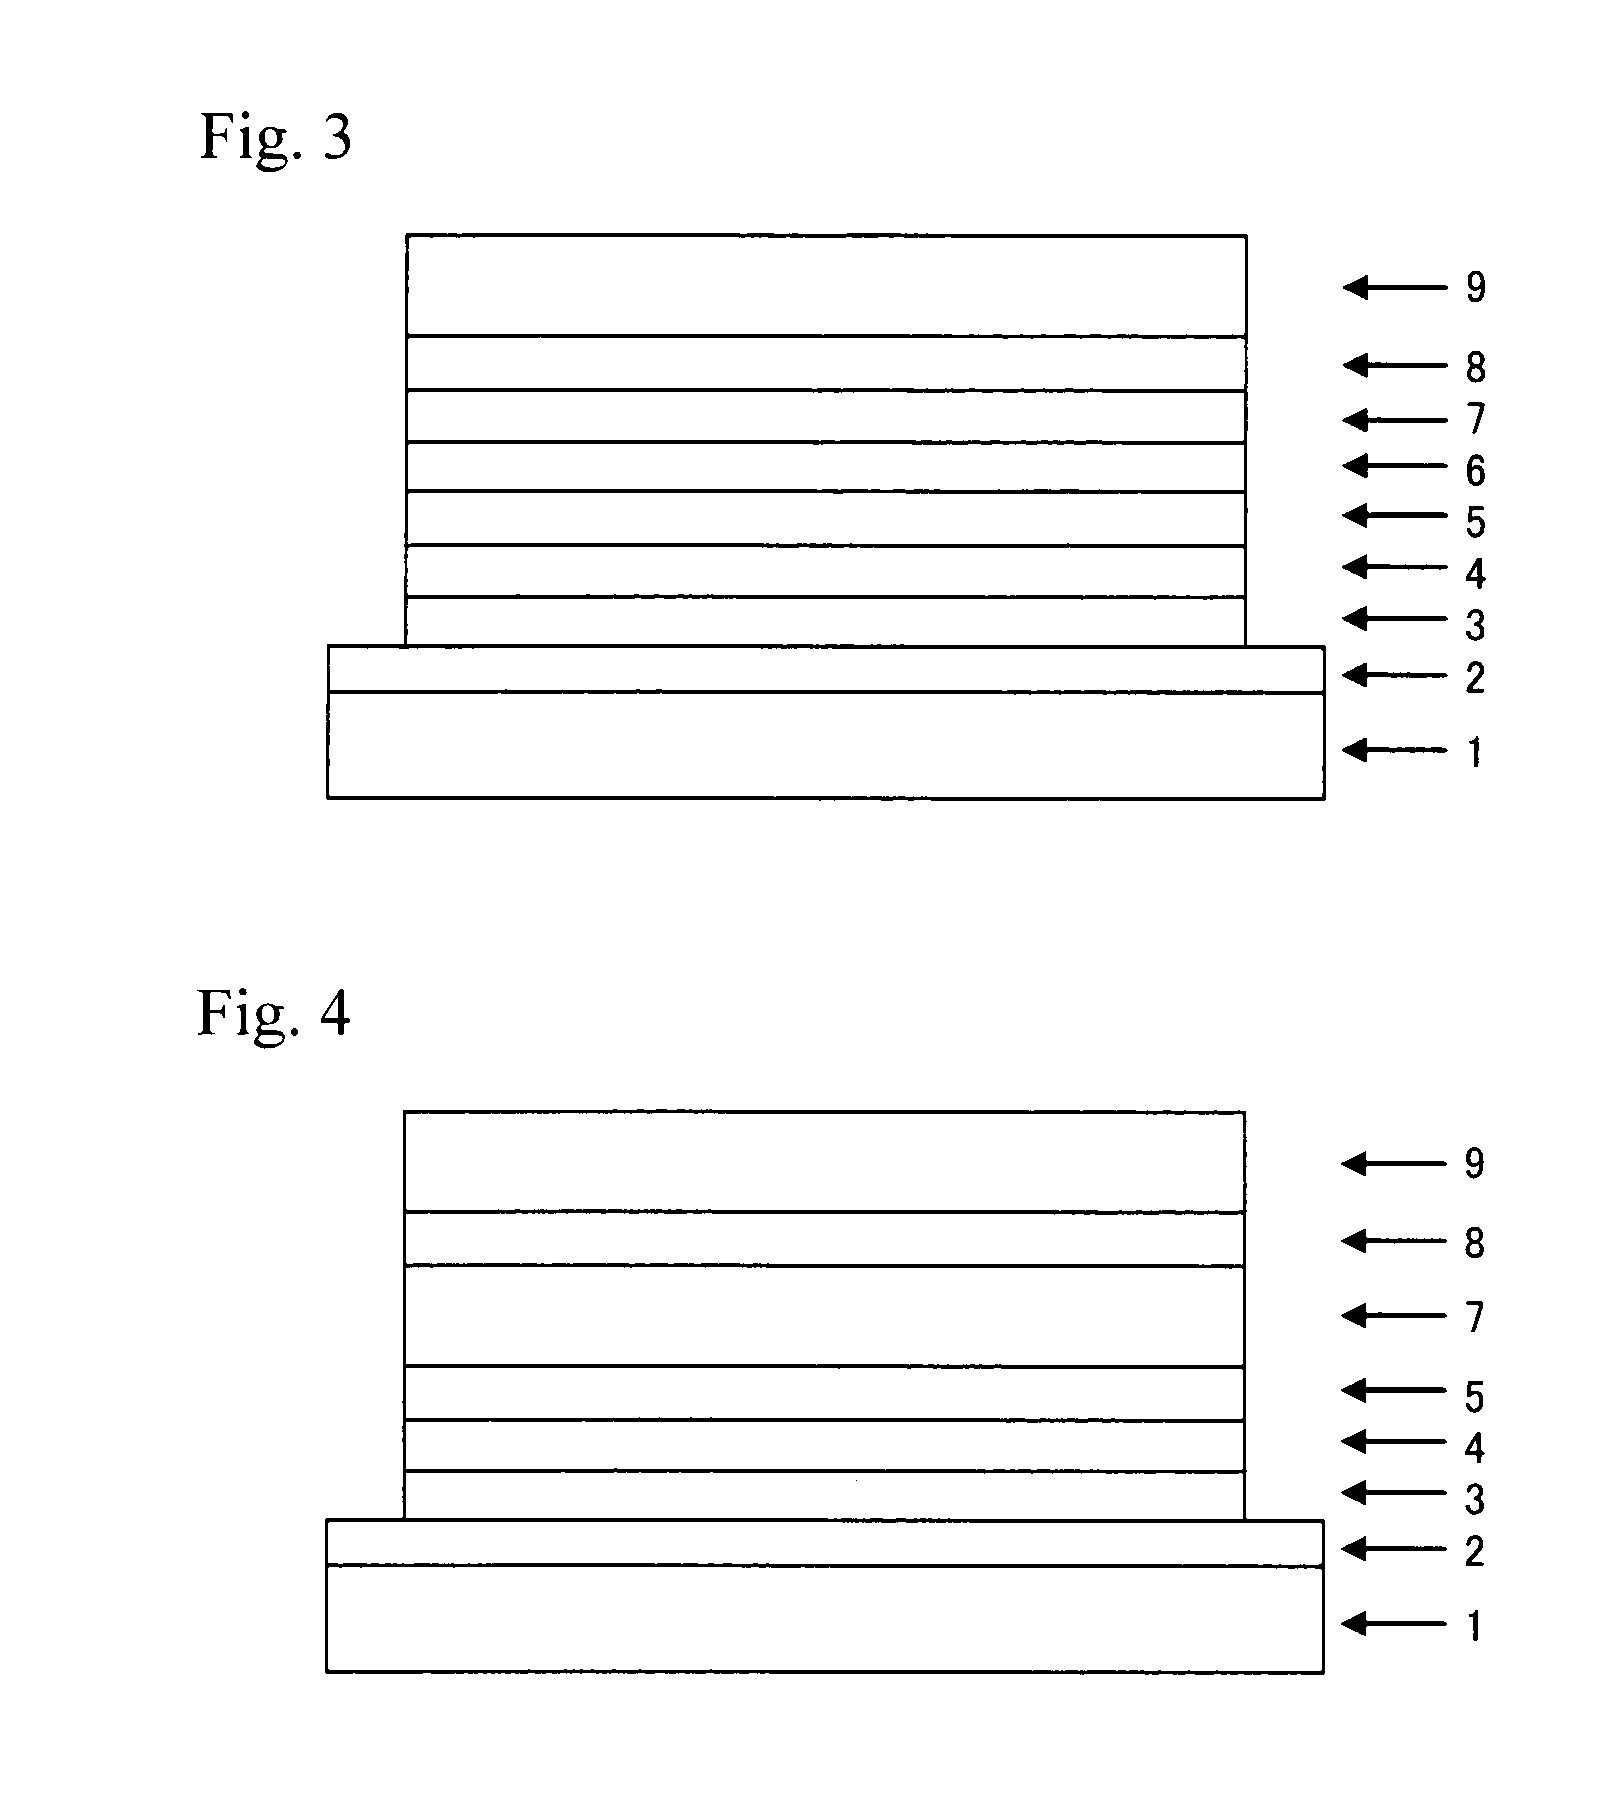 Compound having substituted pyridyl group and pyridoindole ring structure linked through phenylene group, and organic electroluminescent device